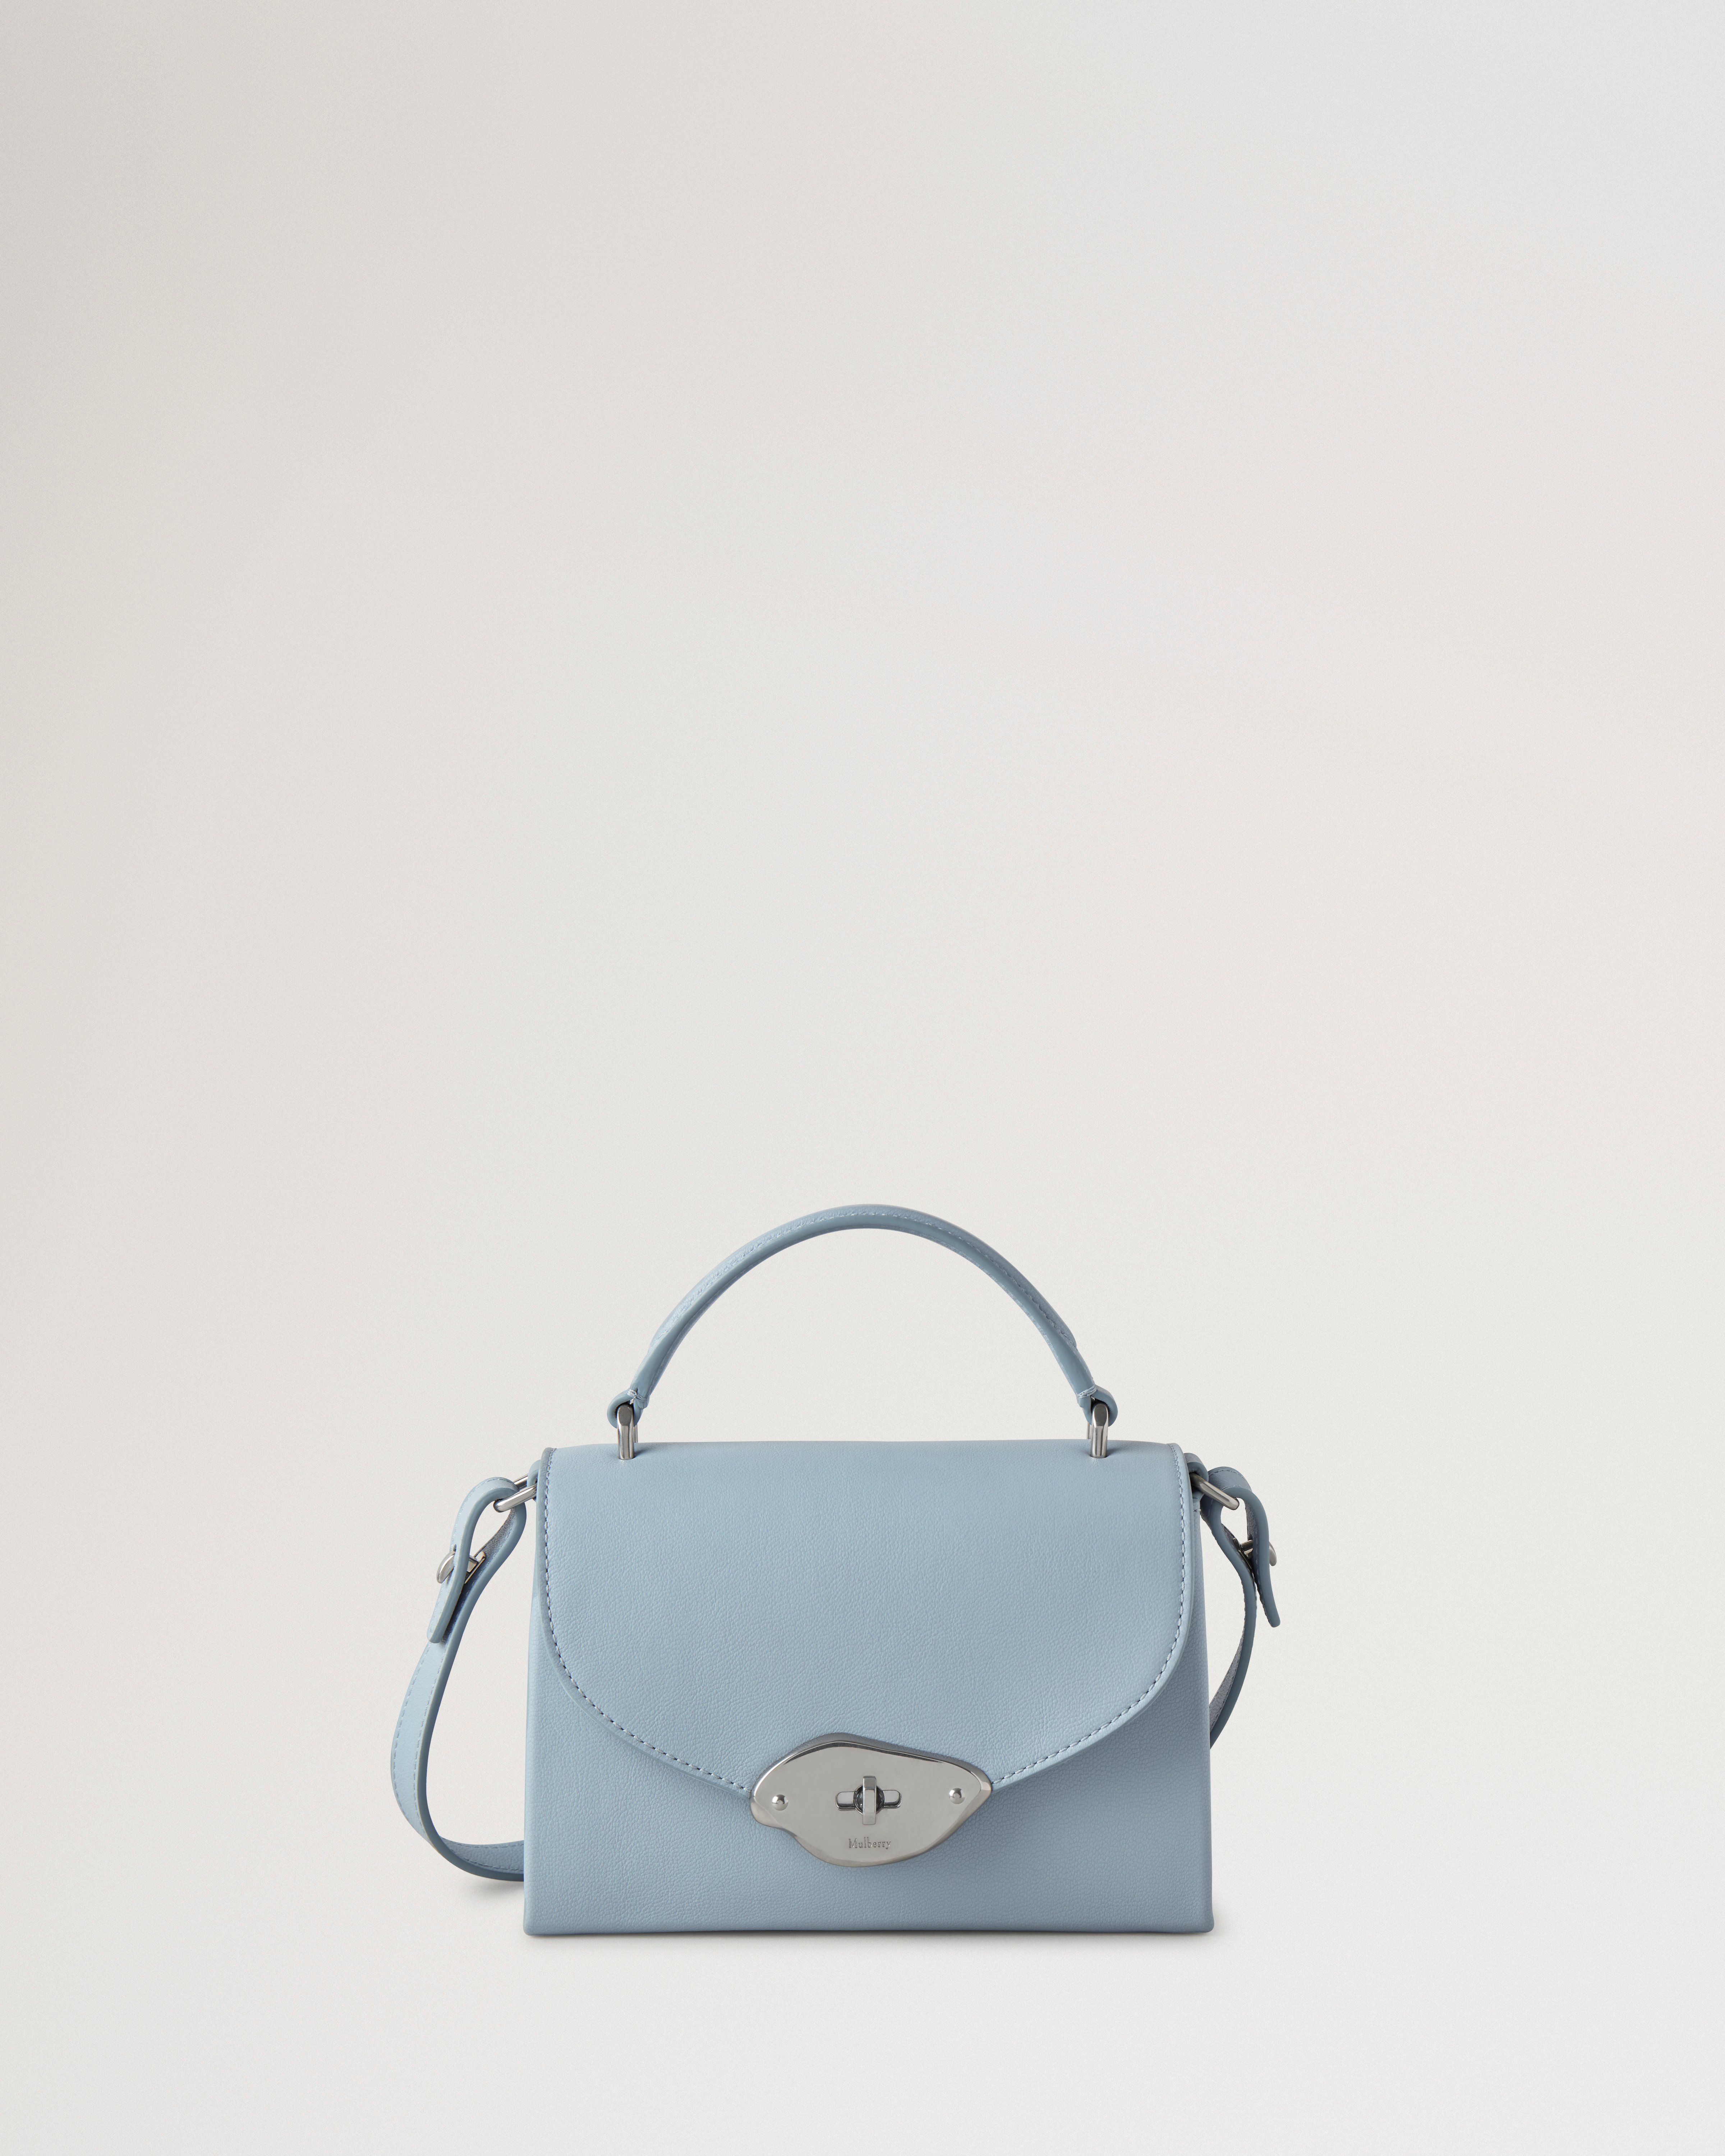 Mulberry Small Lana top handle bag in poplin blue